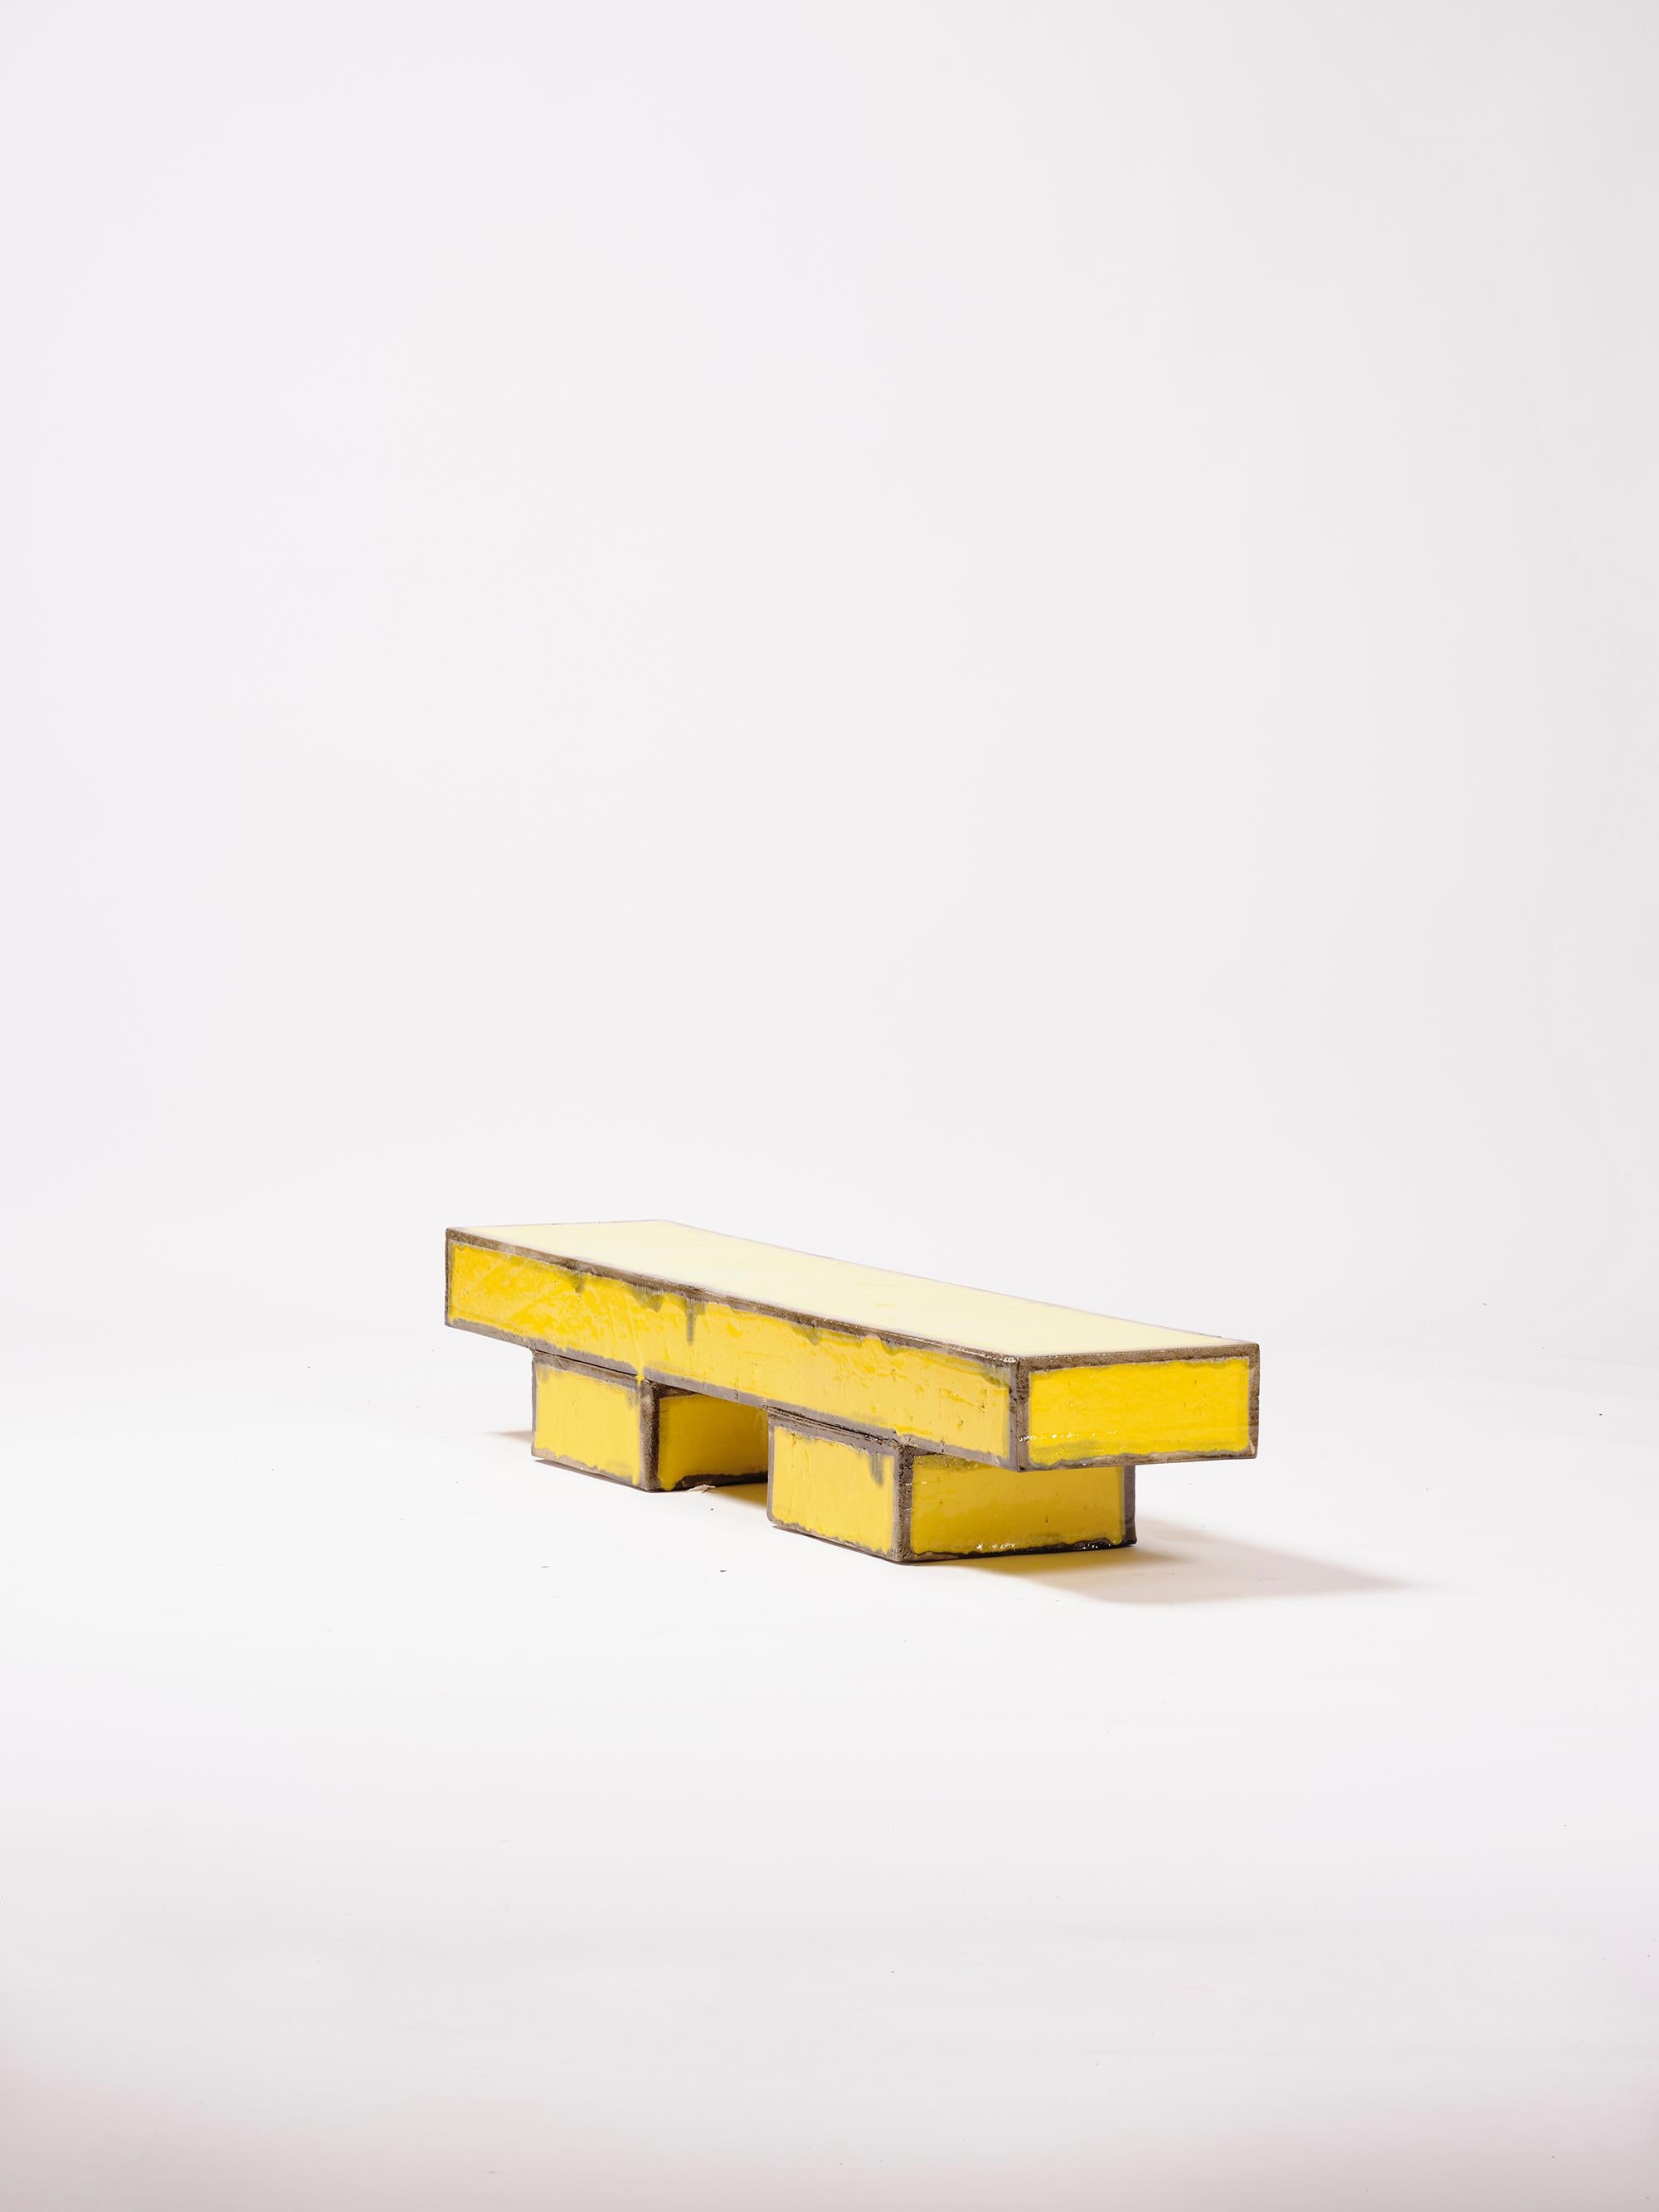 Contemporary Ceramic modern Coffee Table Bench Glazed Stoneware Yellow Black In New Condition For Sale In Rubi, Catalunya